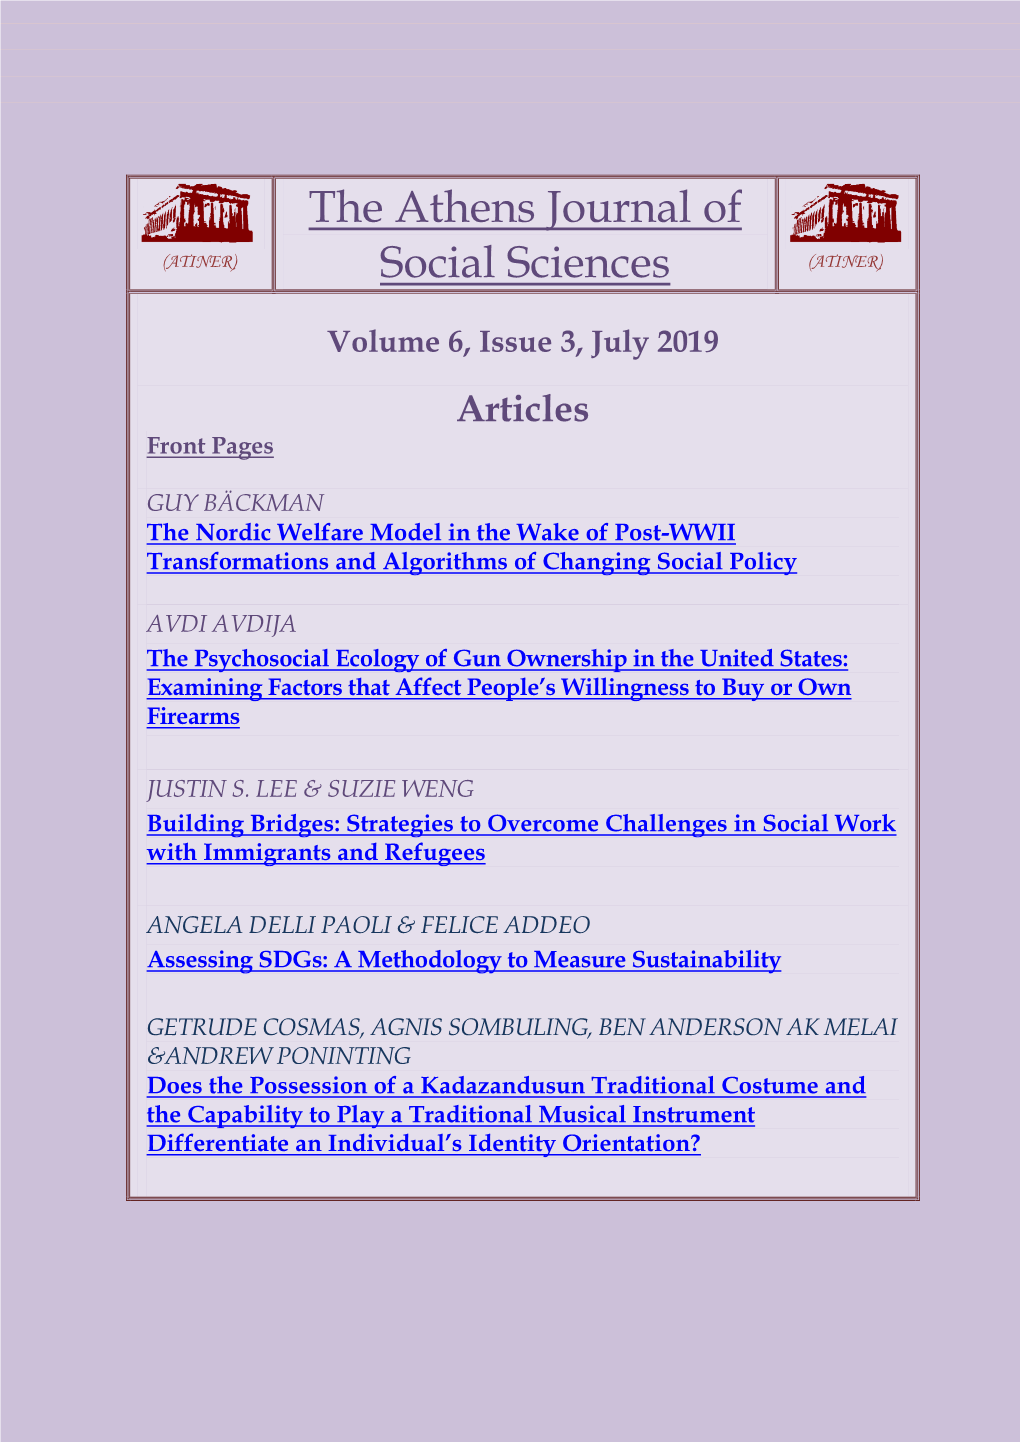 The Athens Journal of Social Sciences ISSN NUMBER: 2241-7737- DOI: 10.30958/Ajss Volume 6, Issue 3, July 2019 Download the Entire Issue (PDF)